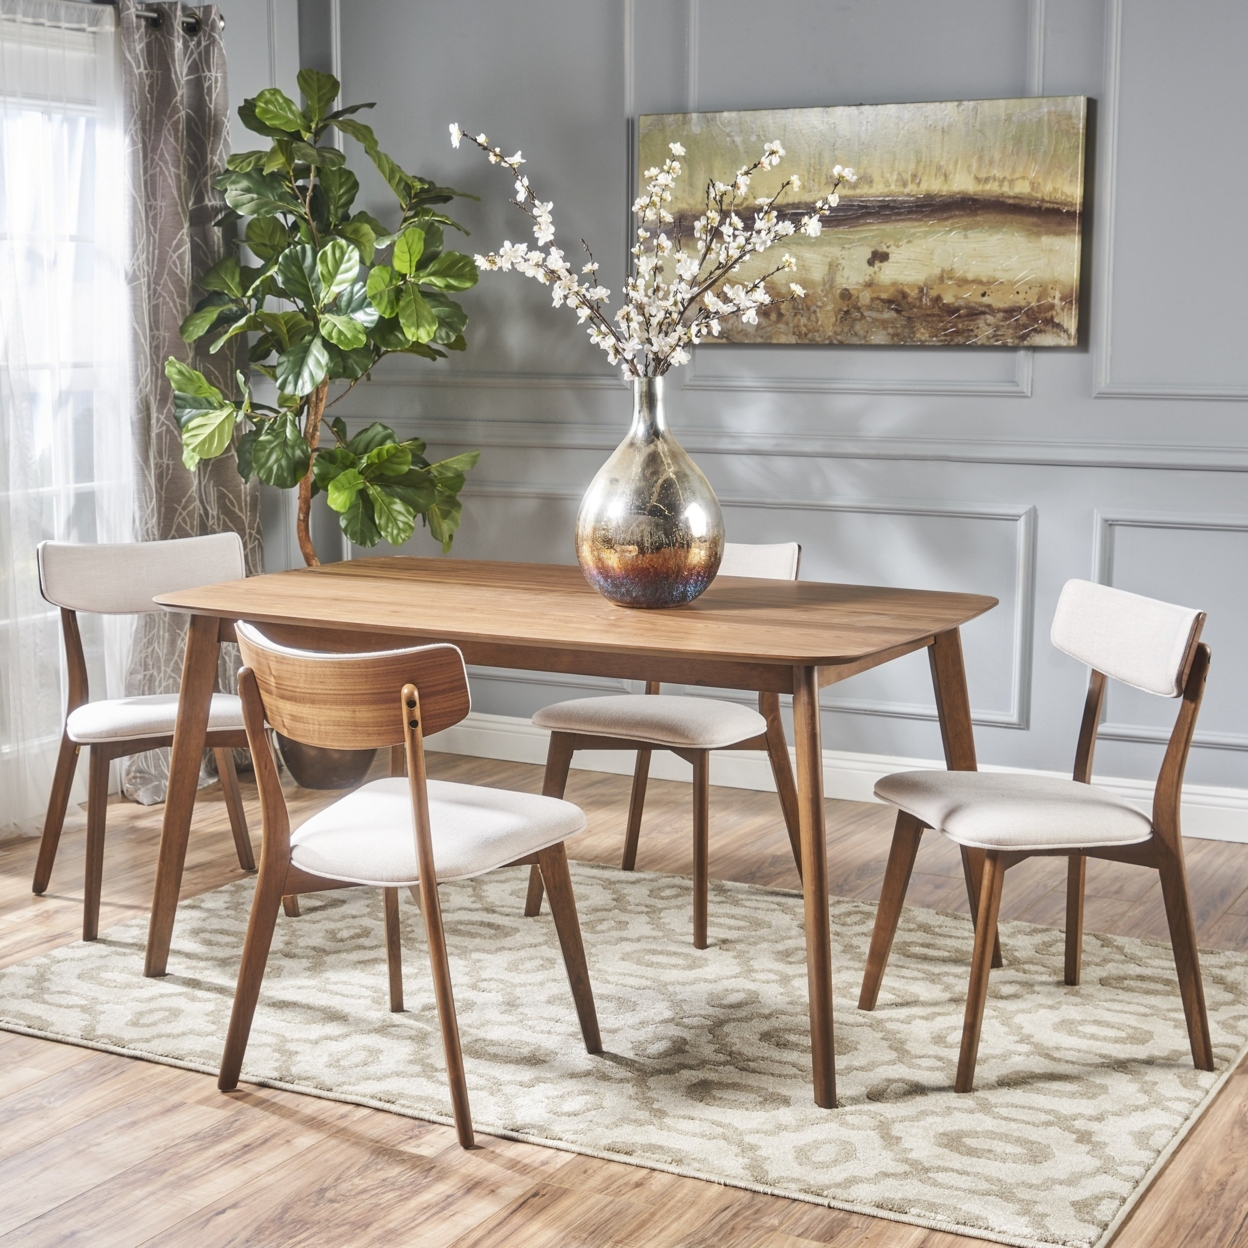 Aman Mid Century Finished 5 Piece Wood Dining Set With Fabric Chairs - Light Beige